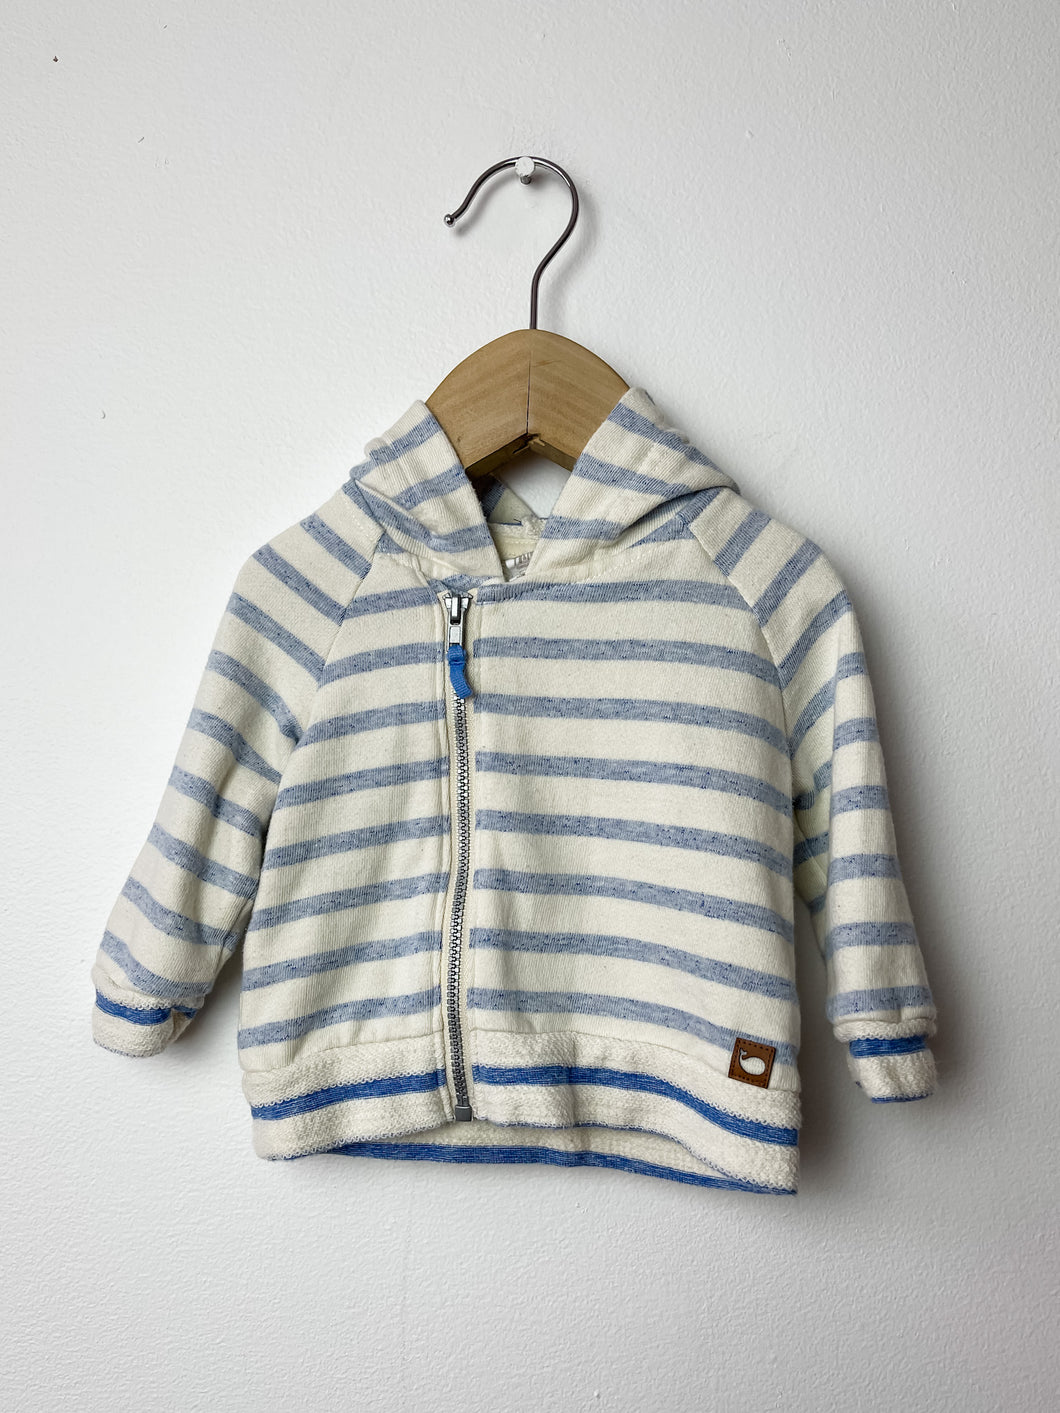 Striped H&M Sweater Size 1-2 Months